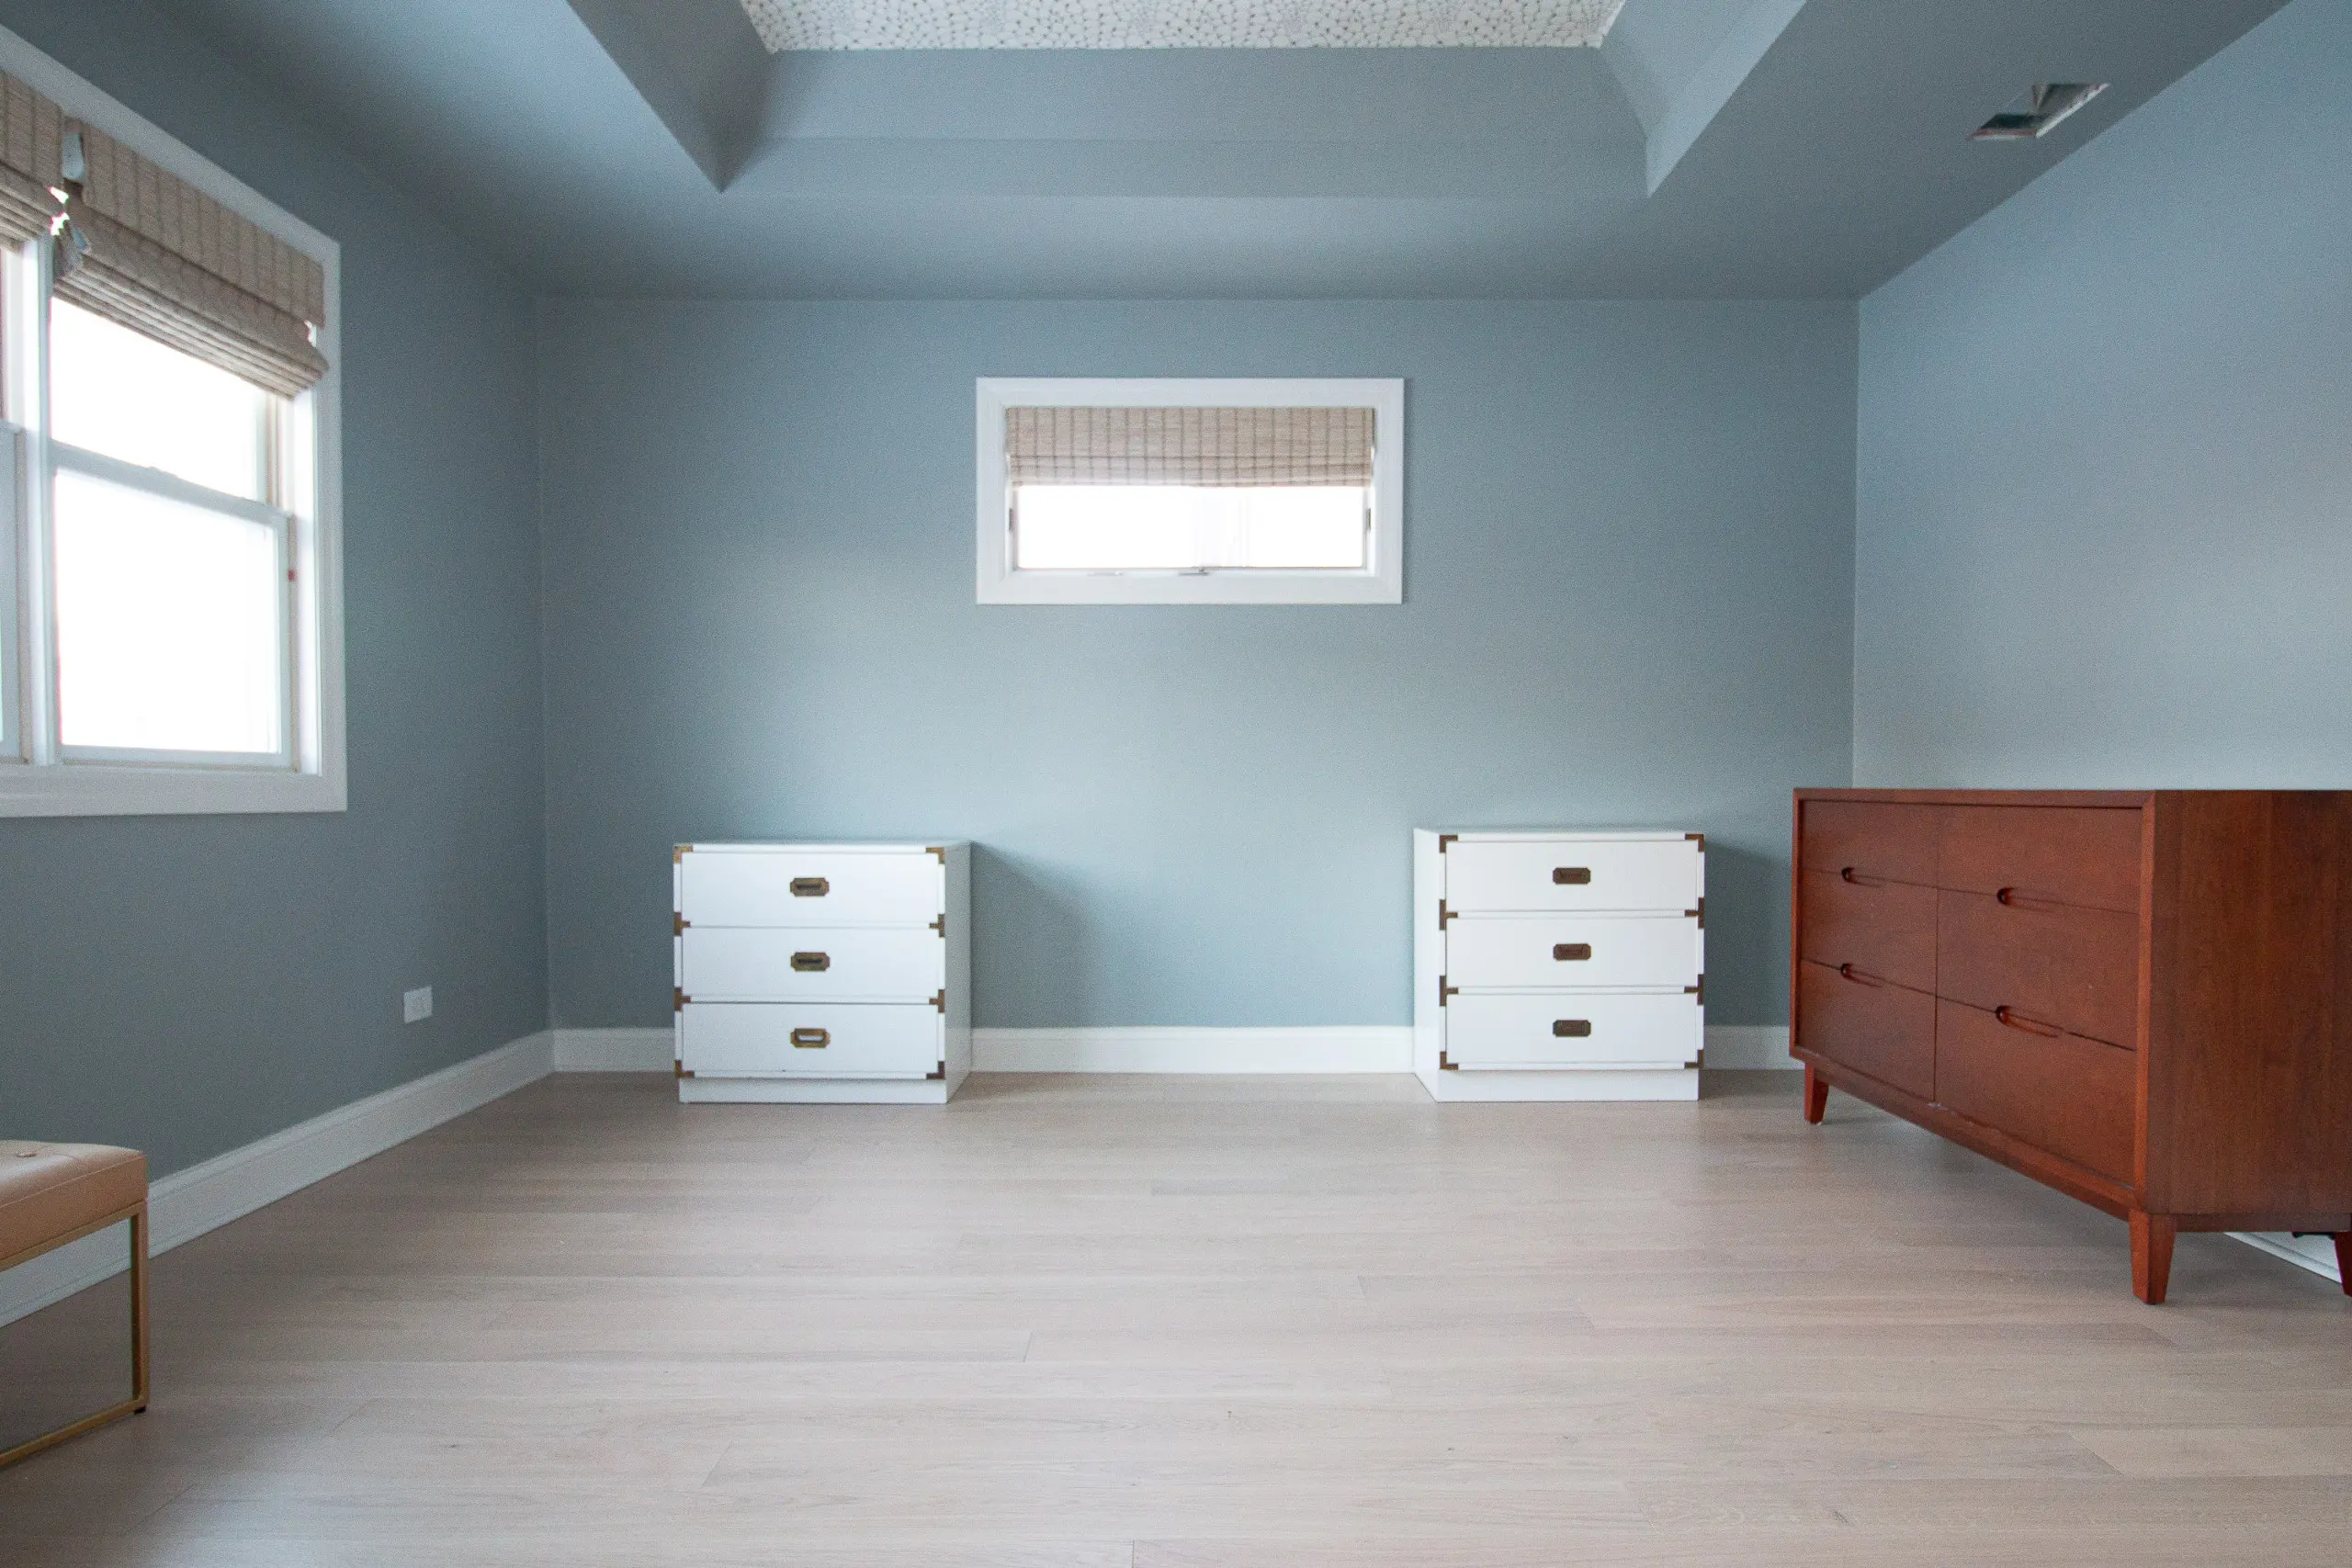 Choosing a Blue Gray Paint Color for Our Bedroom | The DIY Playbook